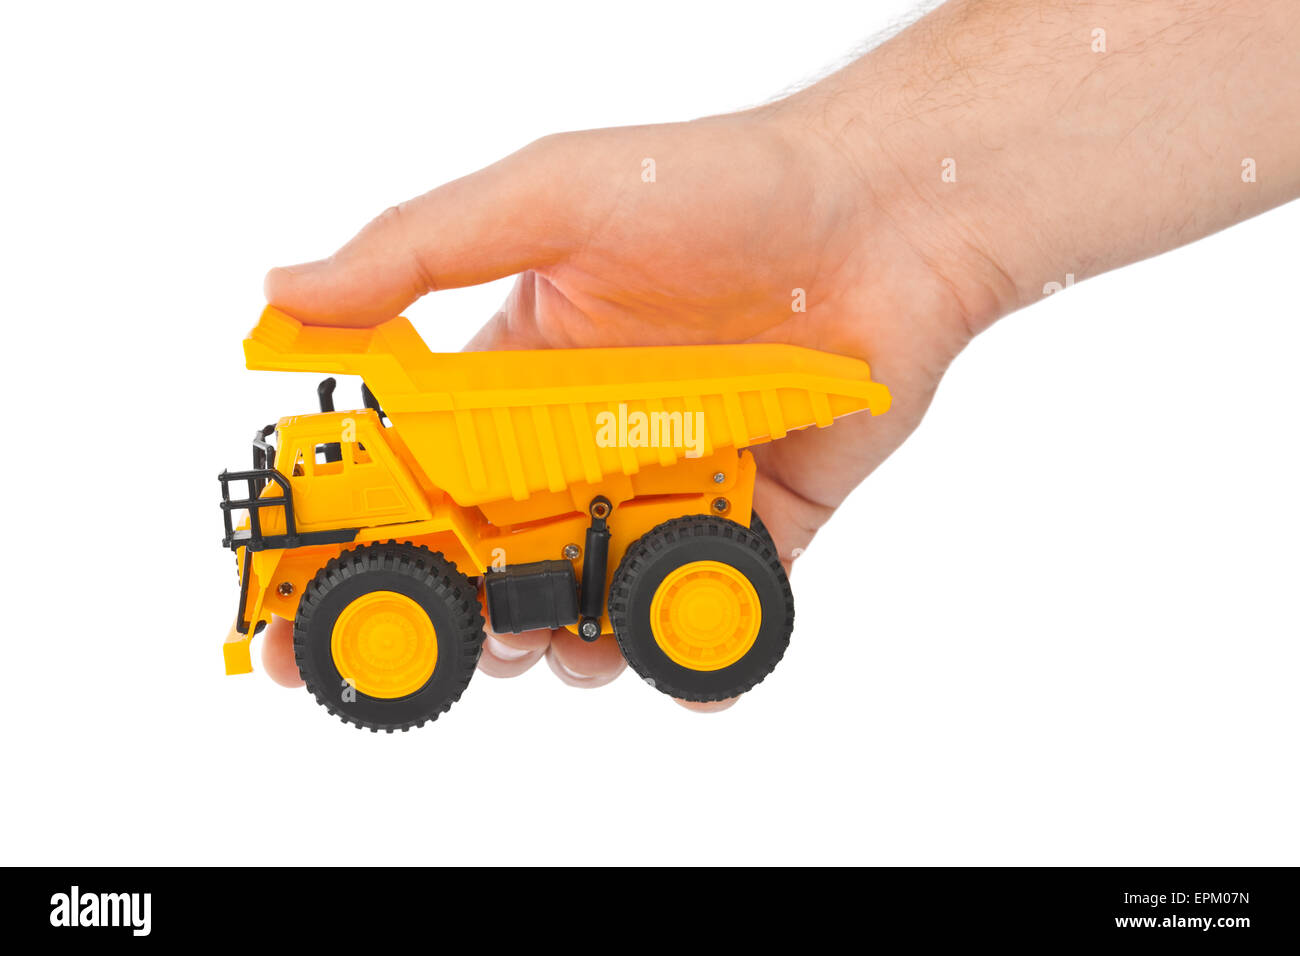 Toy car truck in hand Stock Photo